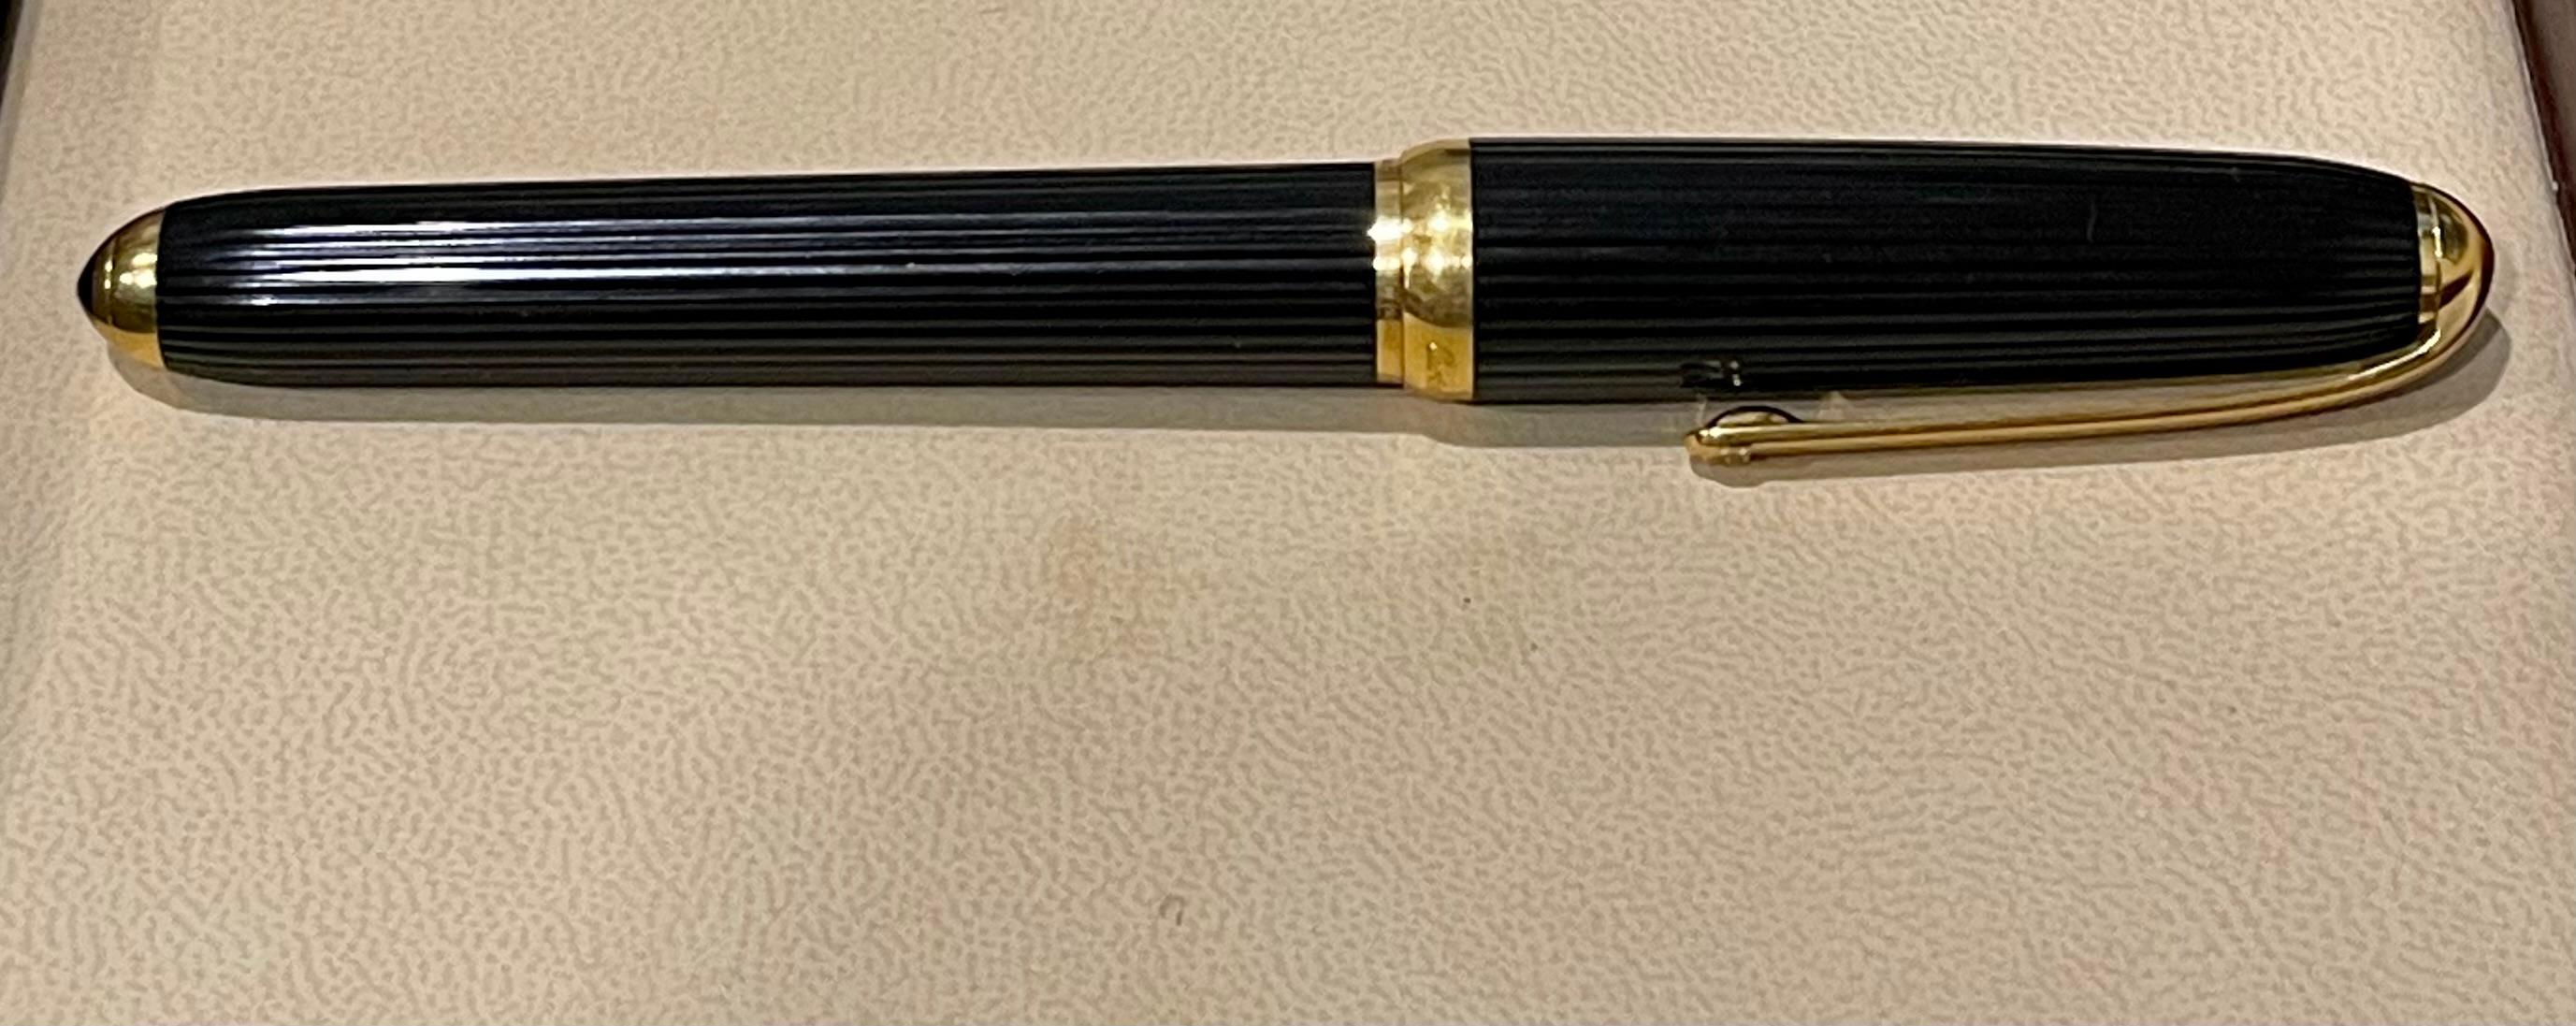 Cartier Louis Black Composite Gold Plated Ball Pen 018667, Pre Owned 1